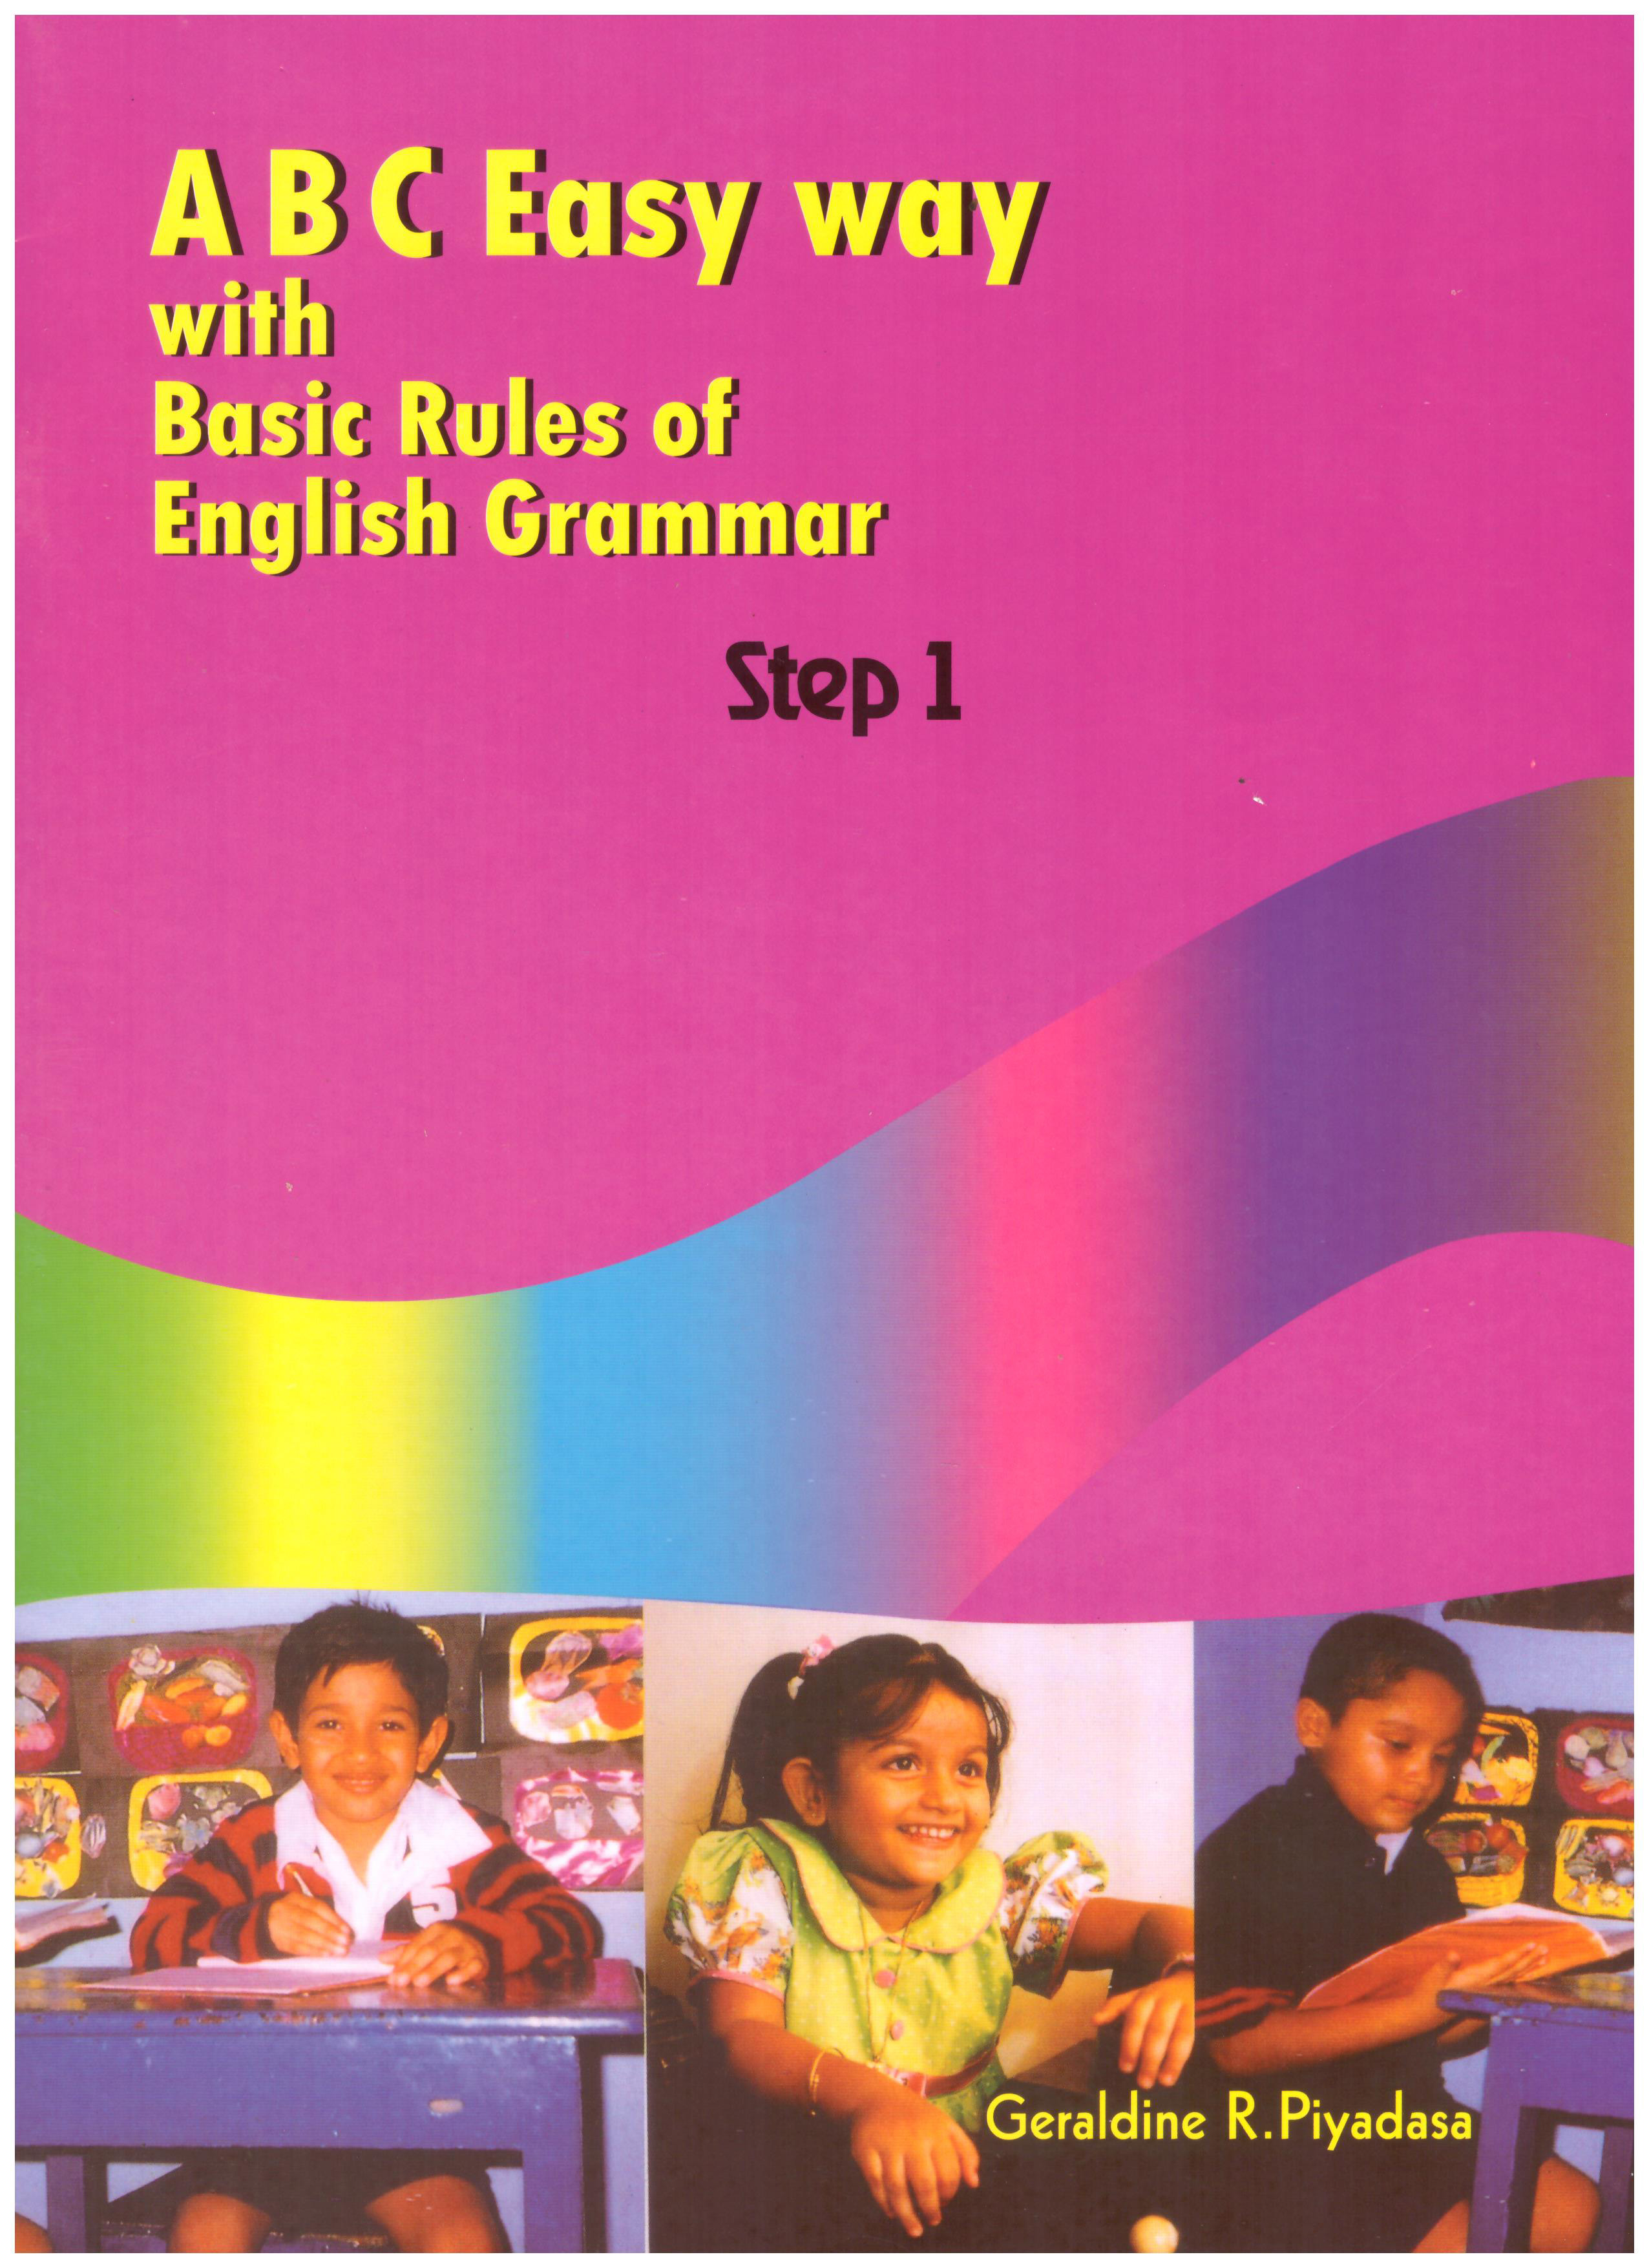 A B C Easy Way With Basic Rules of English Grammar Step 1